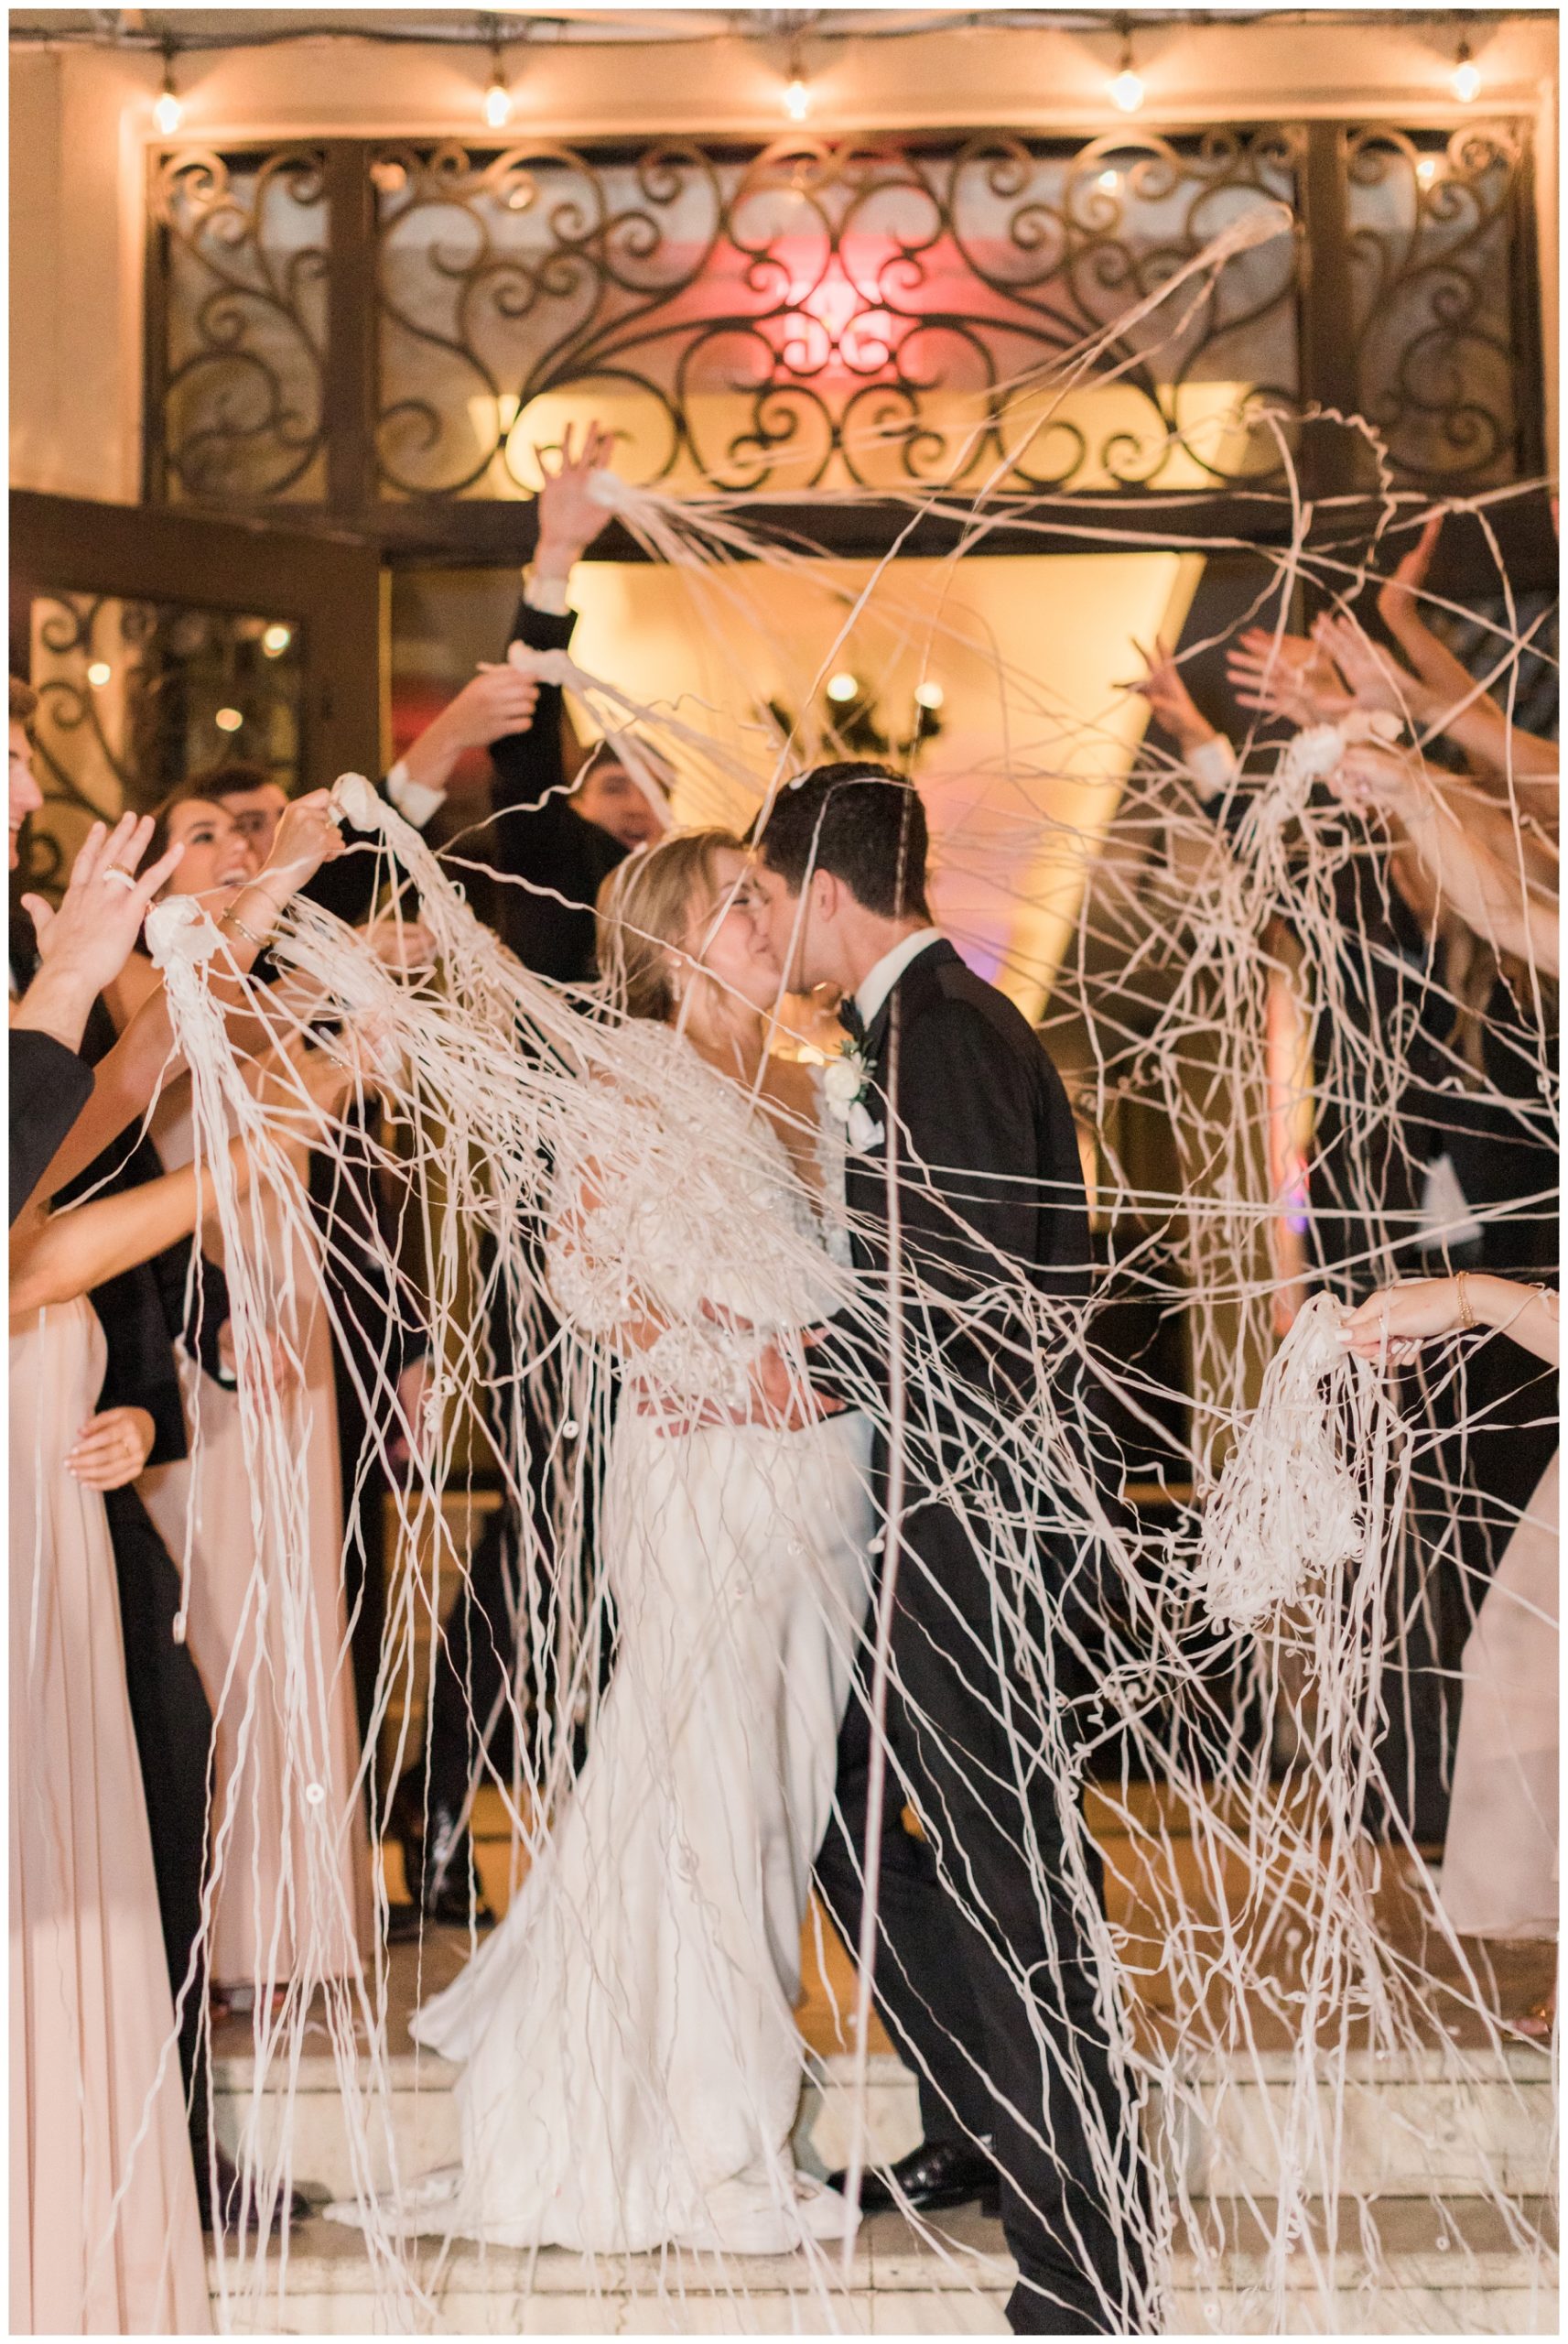 Bride and groom exit with silly string